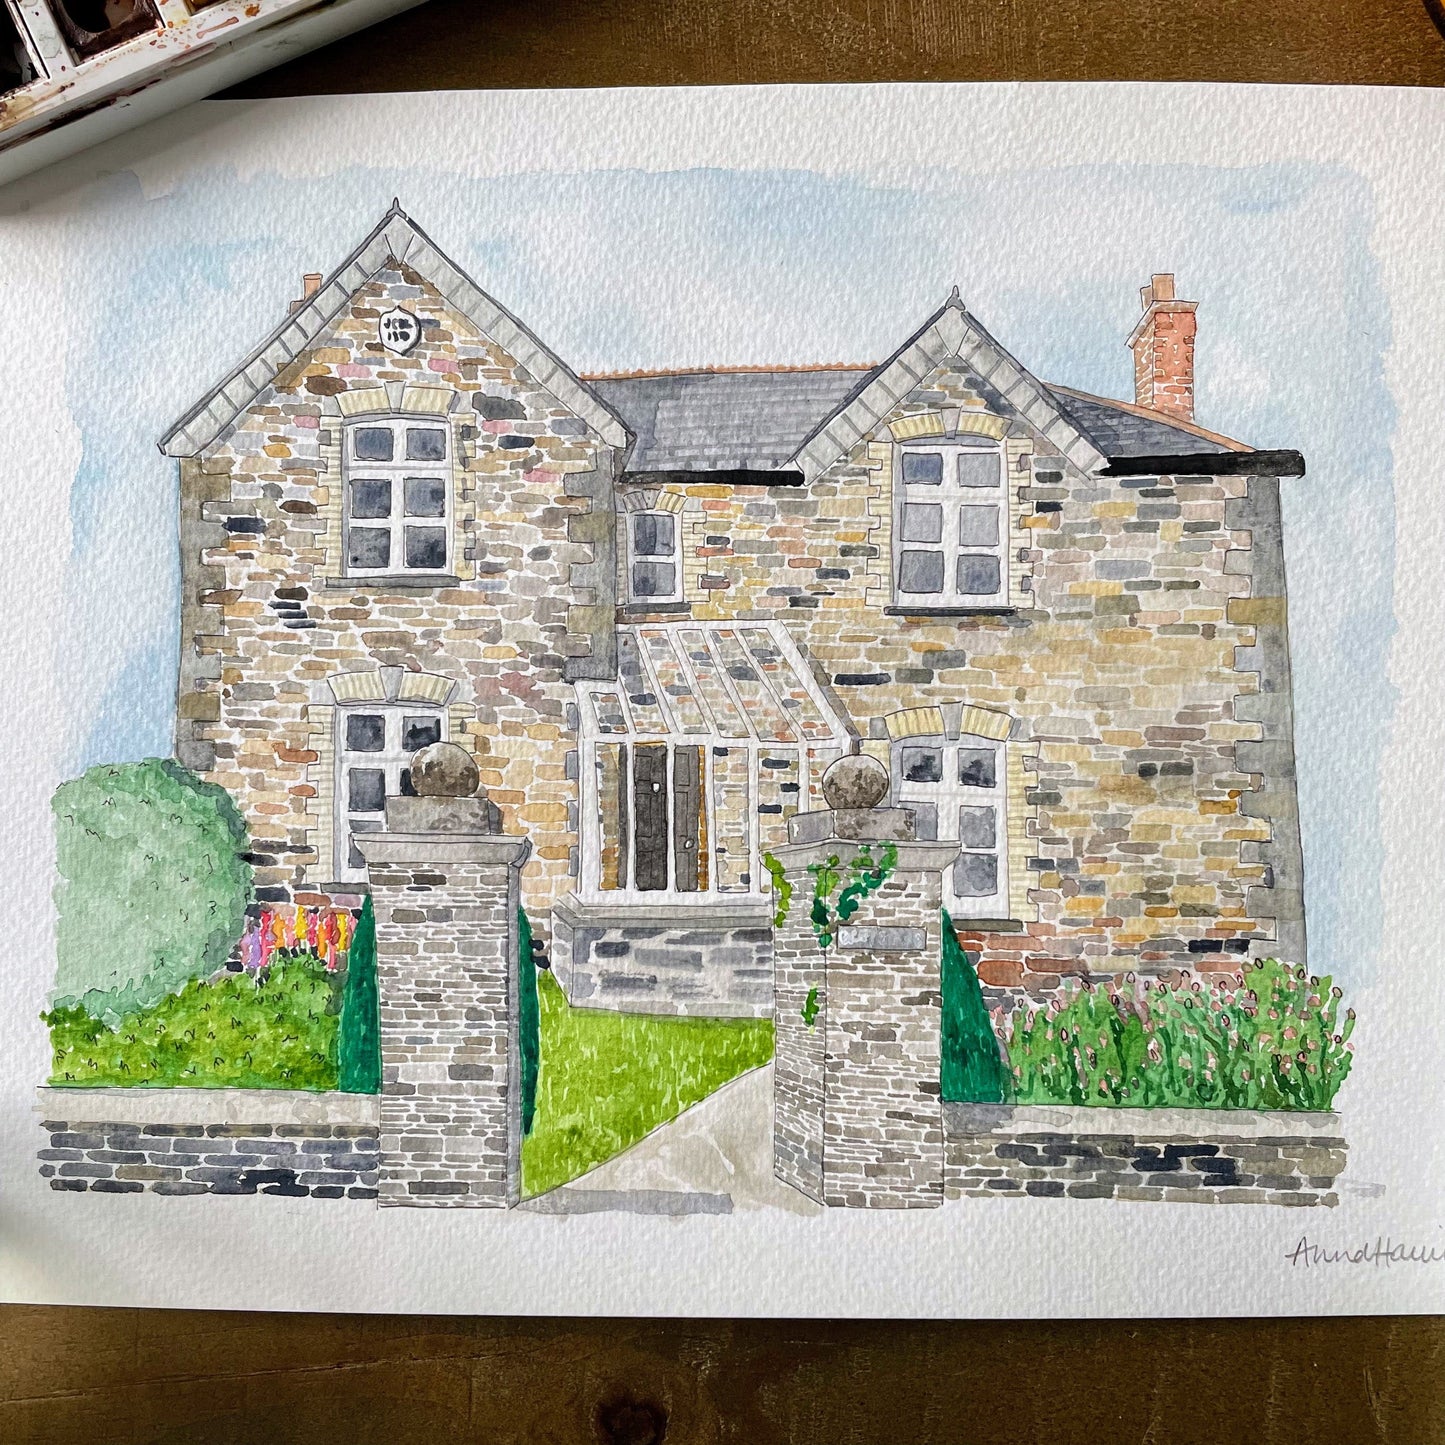 And Hope Designs Commission Custom Watercolour House Portrait